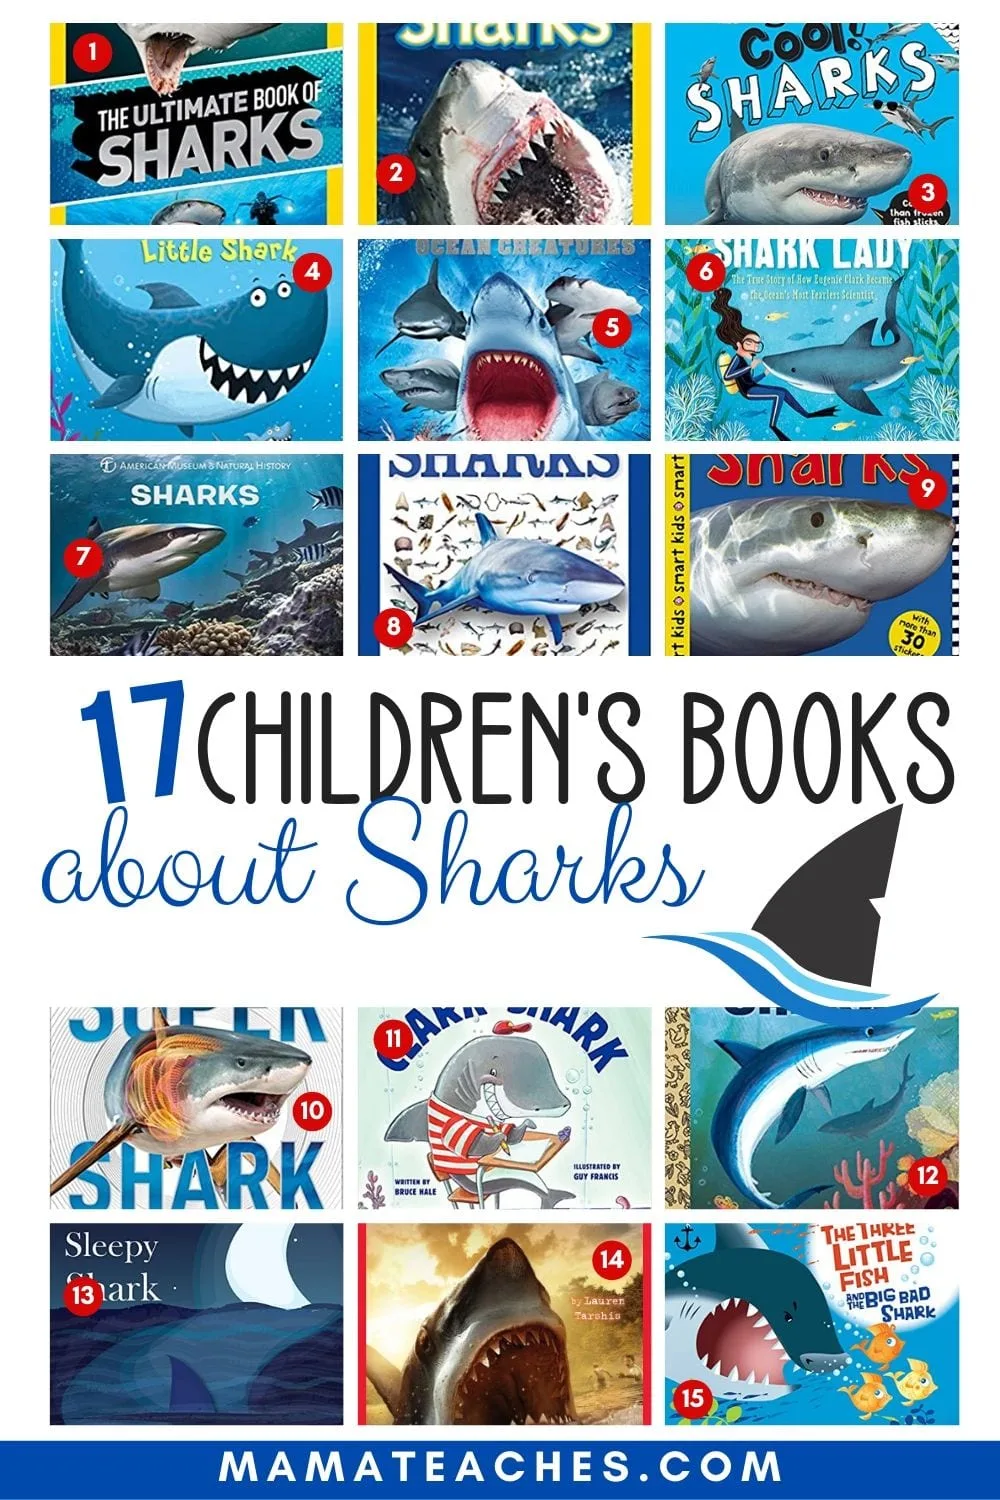 17 Children's Books About Sharks - What are you reading for shark week? - MamaTeaches.com